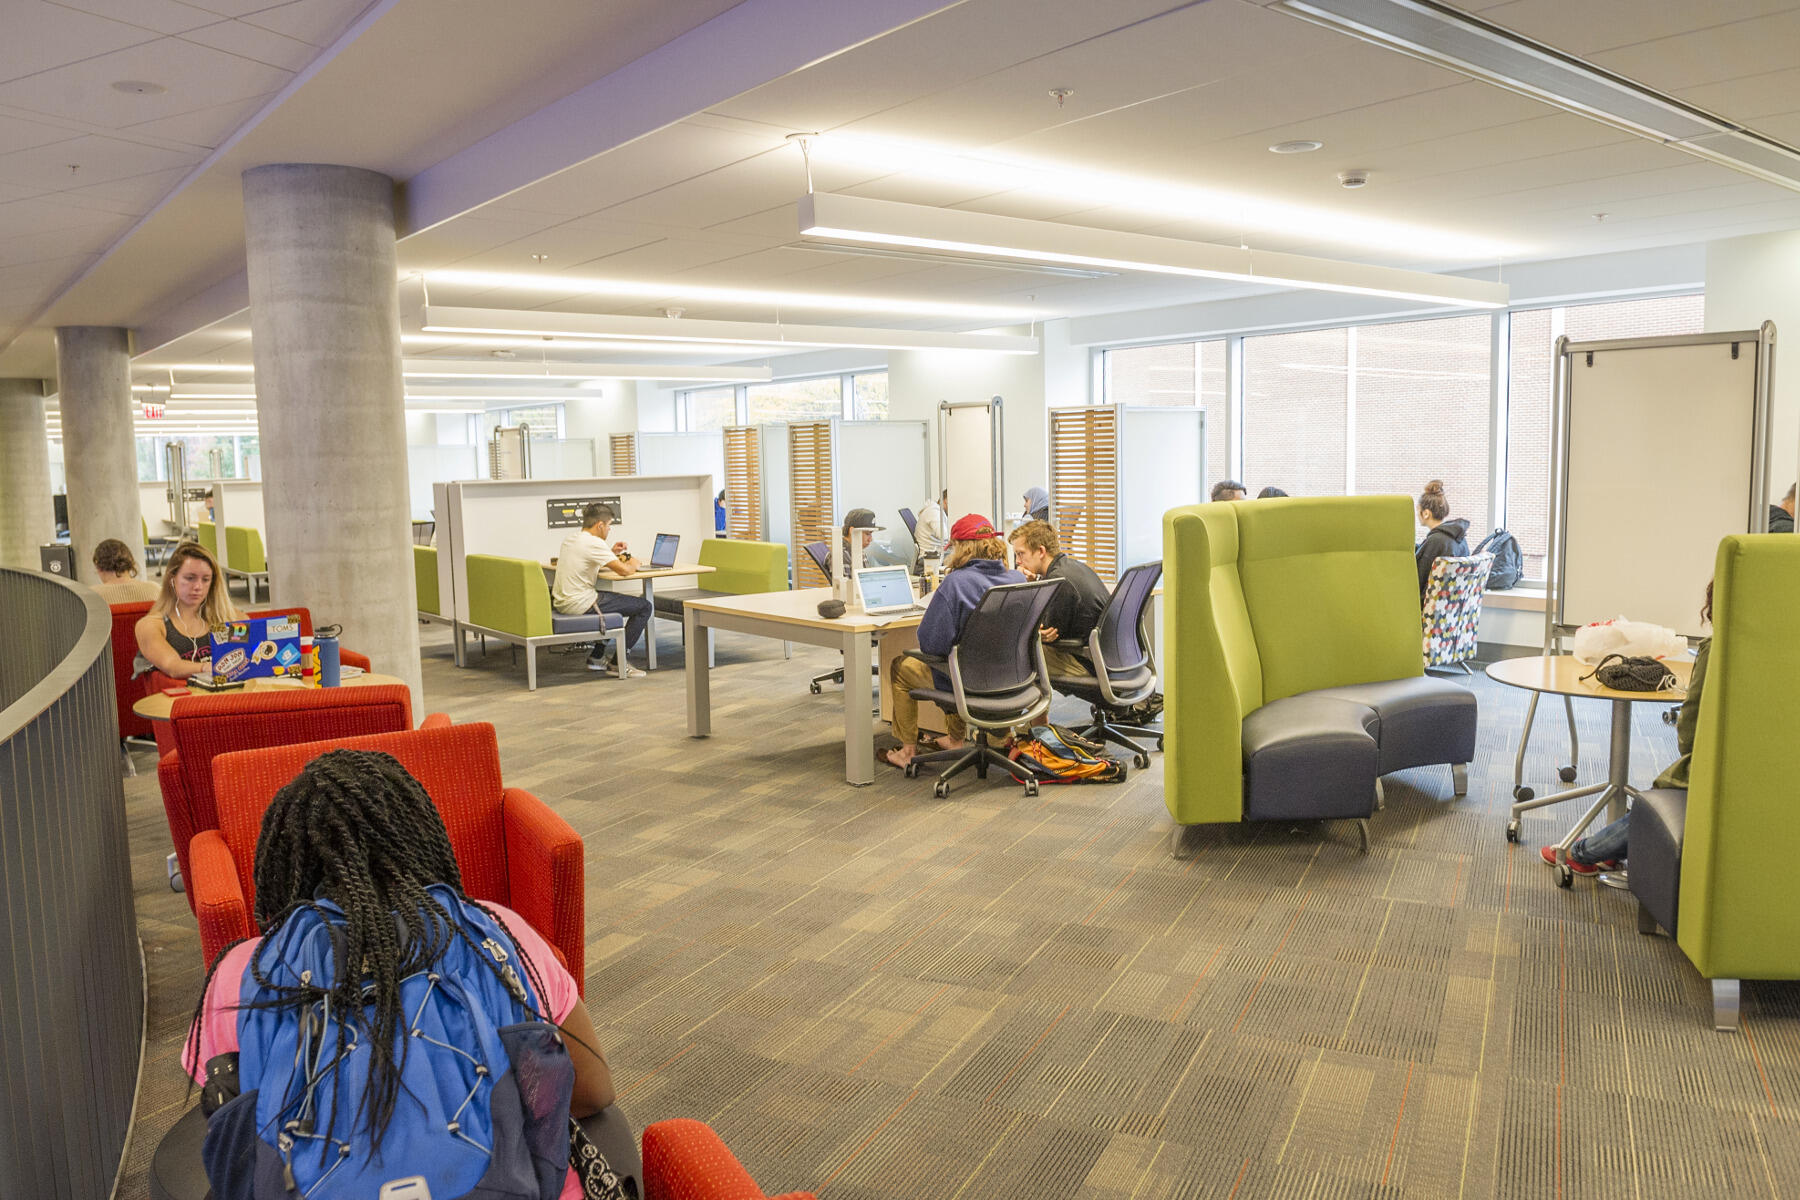 The new library adds more than 1,000 new seats and features a variety of collaborative study areas.